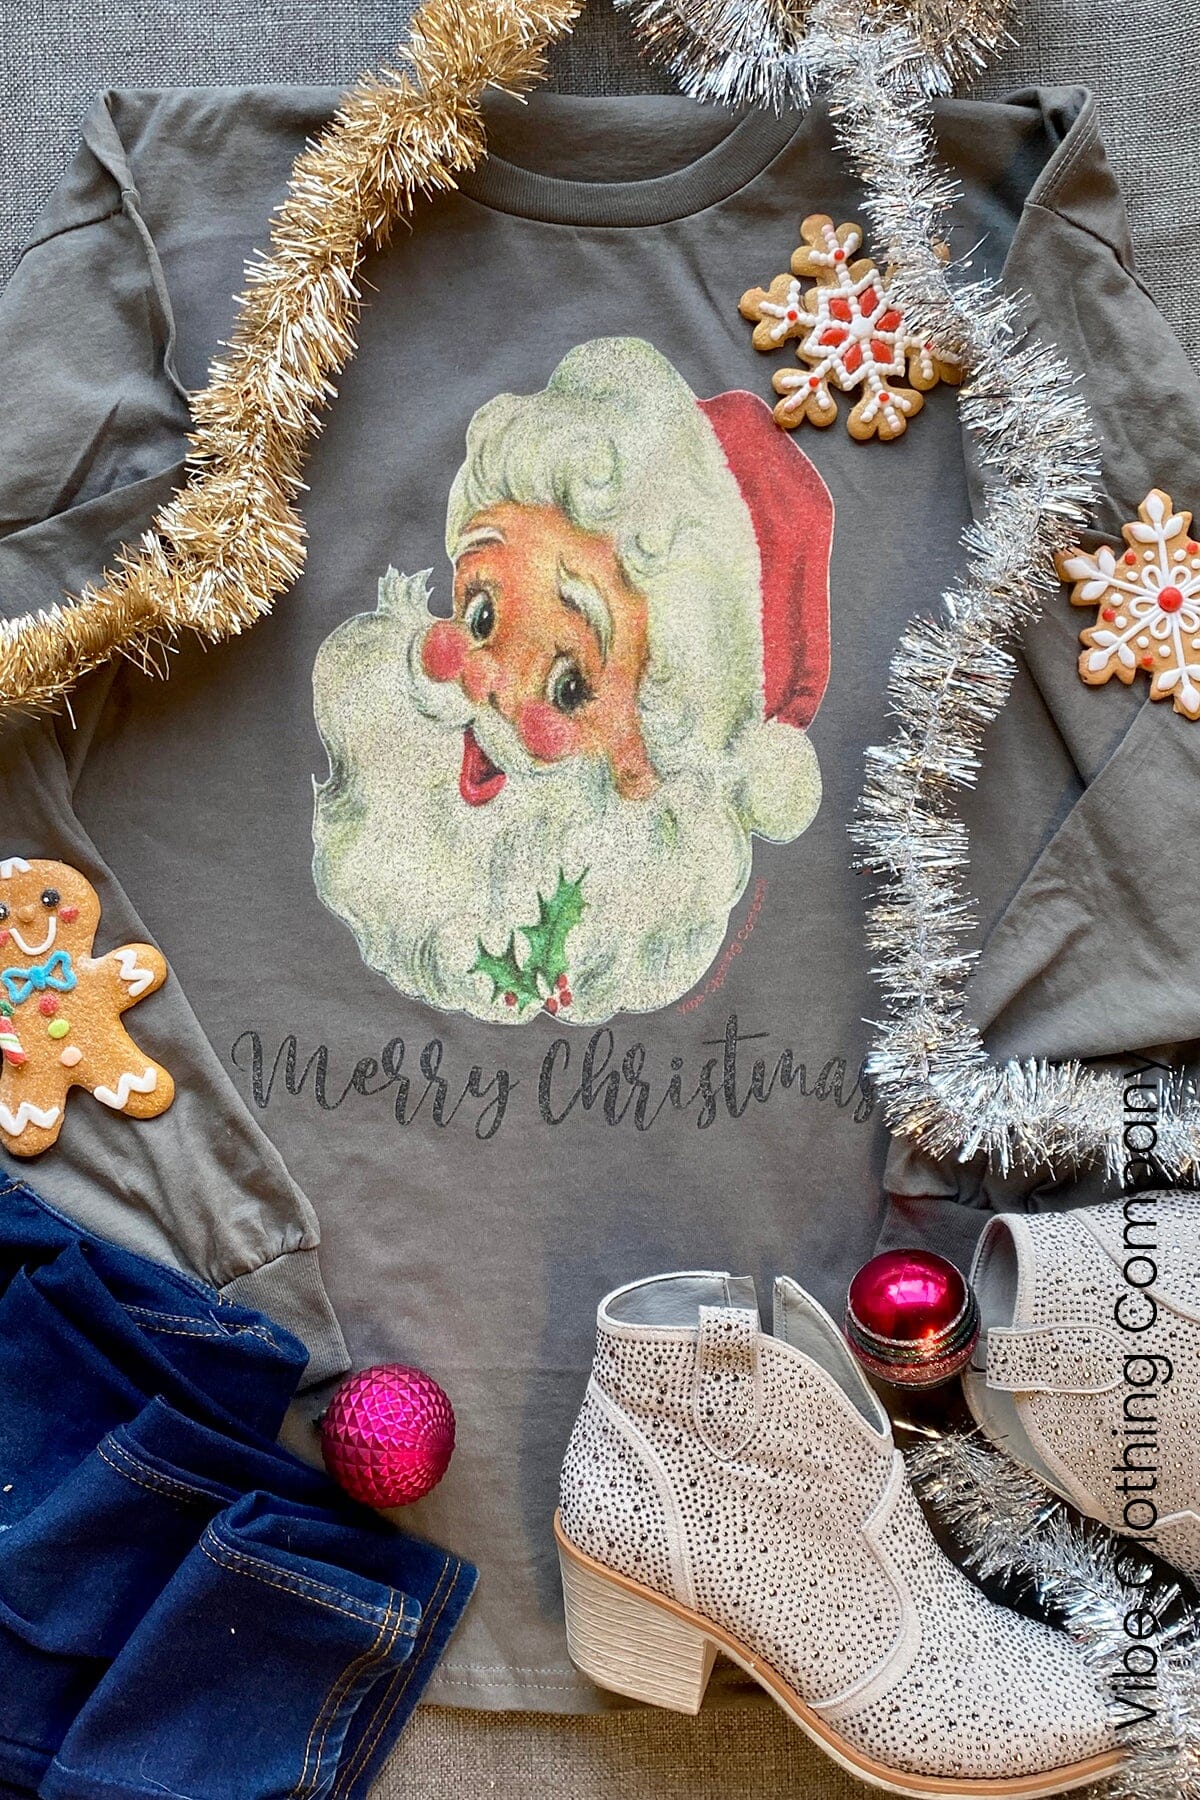 St Nick Graphic Tee by Vibe Clothing